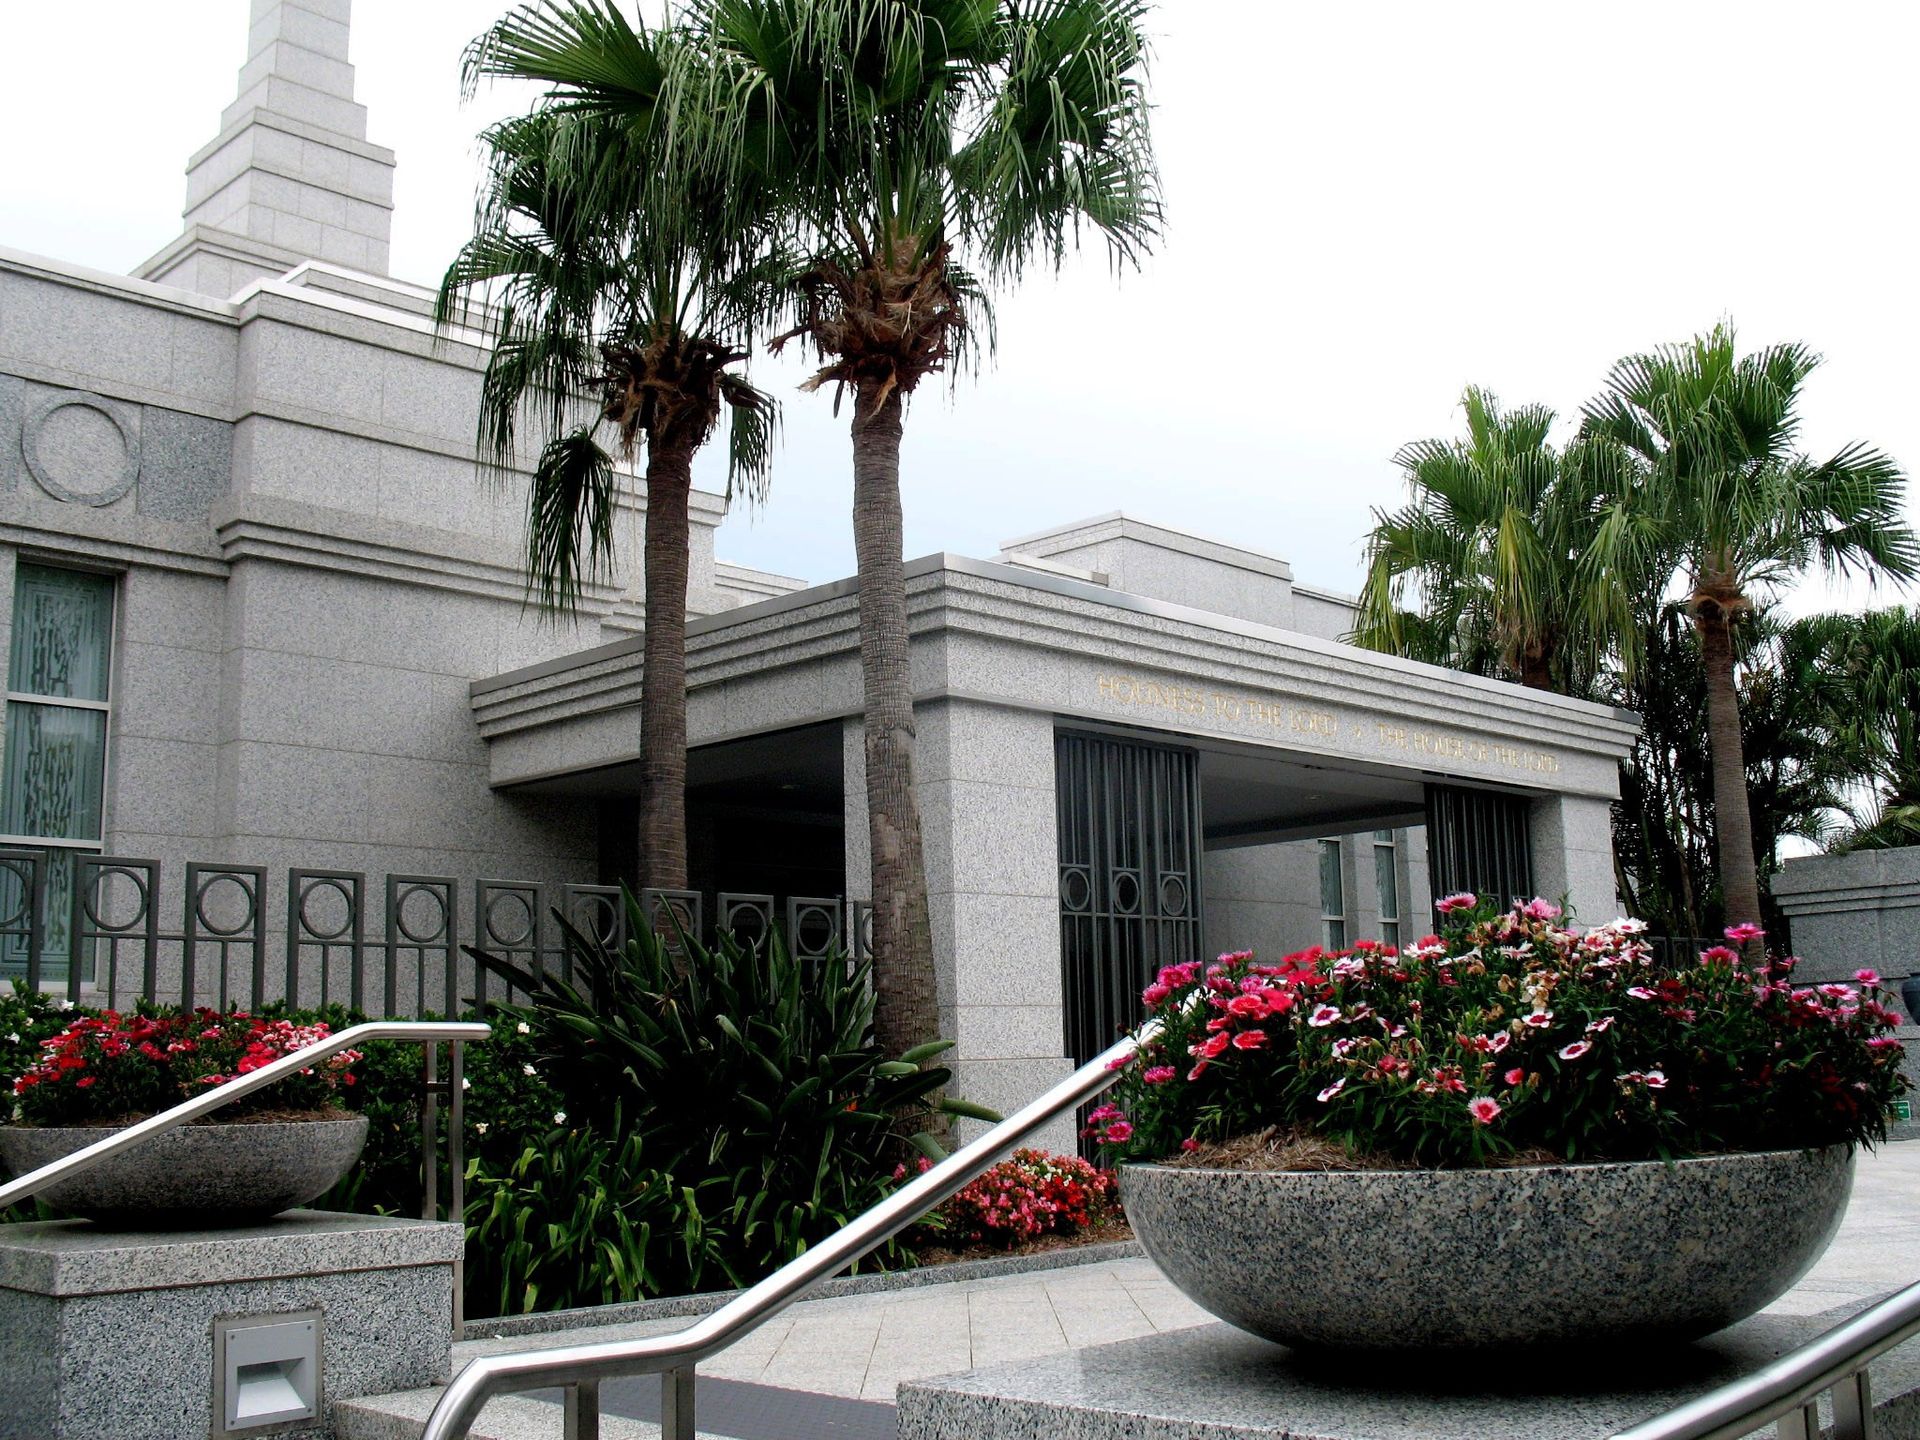 Stairs lead to the entrance of the Brisbane Australia Temple.